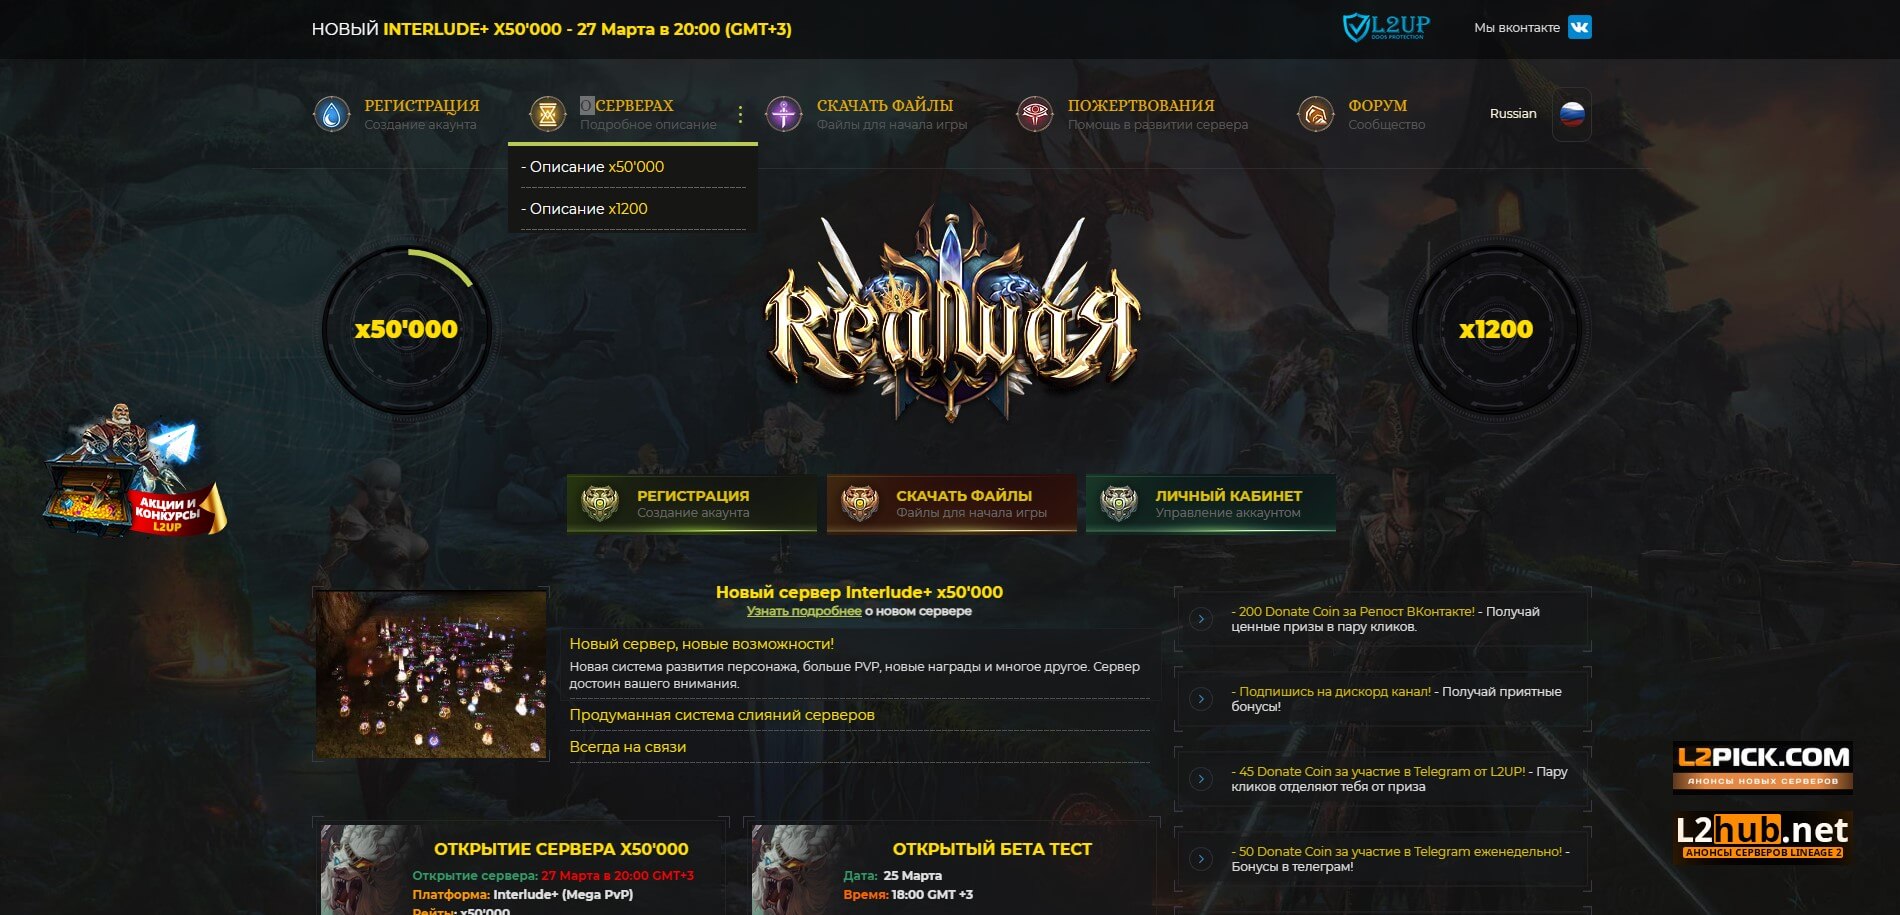 🔥 Intense Lineage 2 Interlude x50000 on realwar.ws Server! 🔥